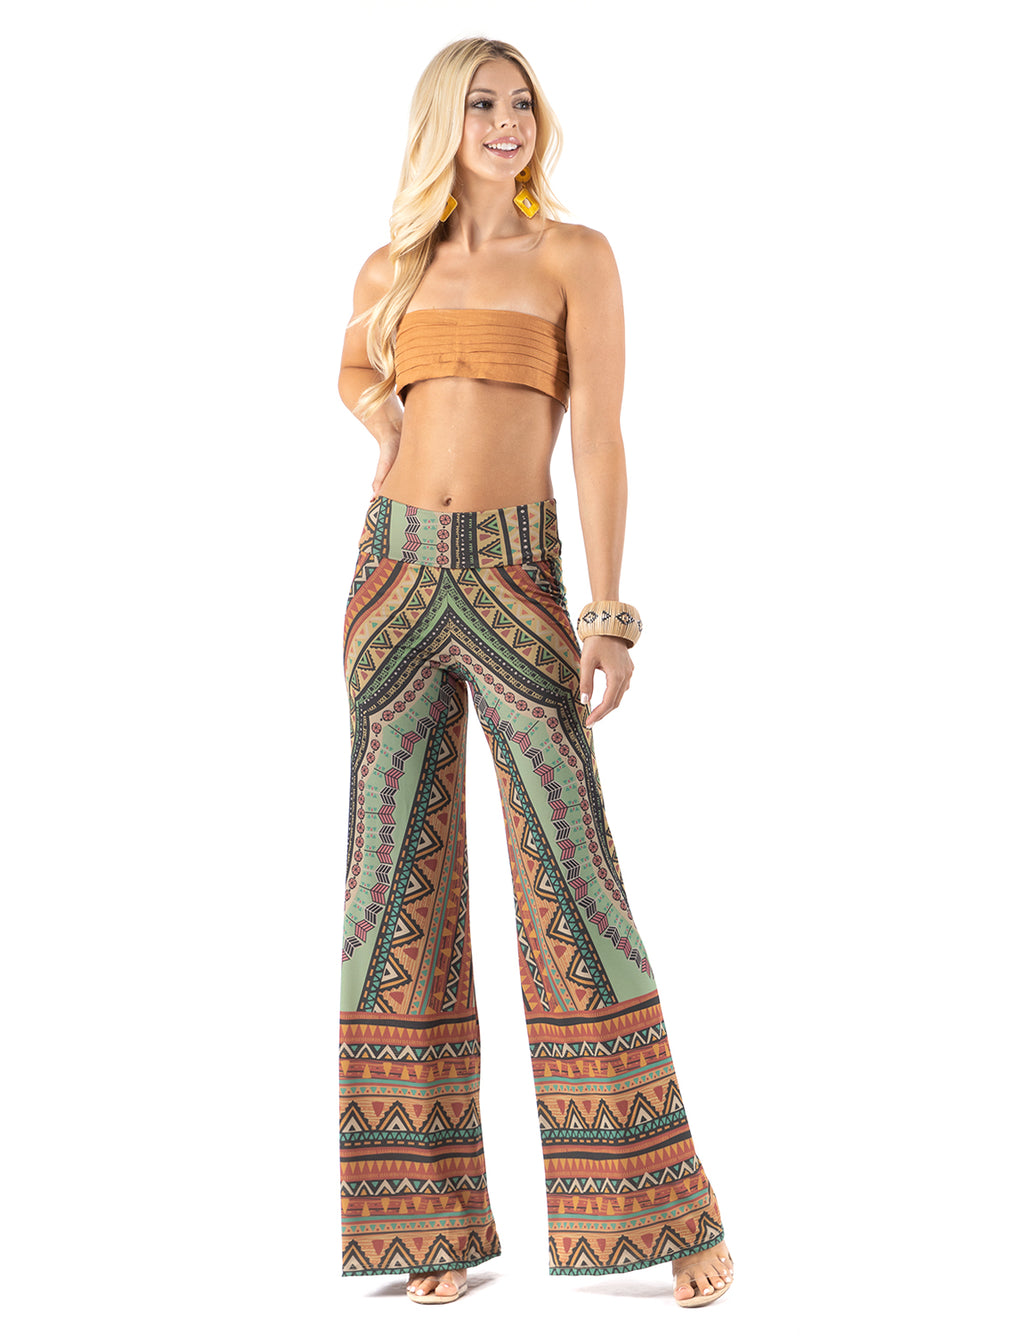 Beautiful woman wearing this amazing Multi color Bohemian Style High waist palazzo pants featuring pockets, wide legs, and a comfortable stretchy fabric perfect for Evening wear, Beach Day, Vacation, Dance, Poolside Parties,Casual day